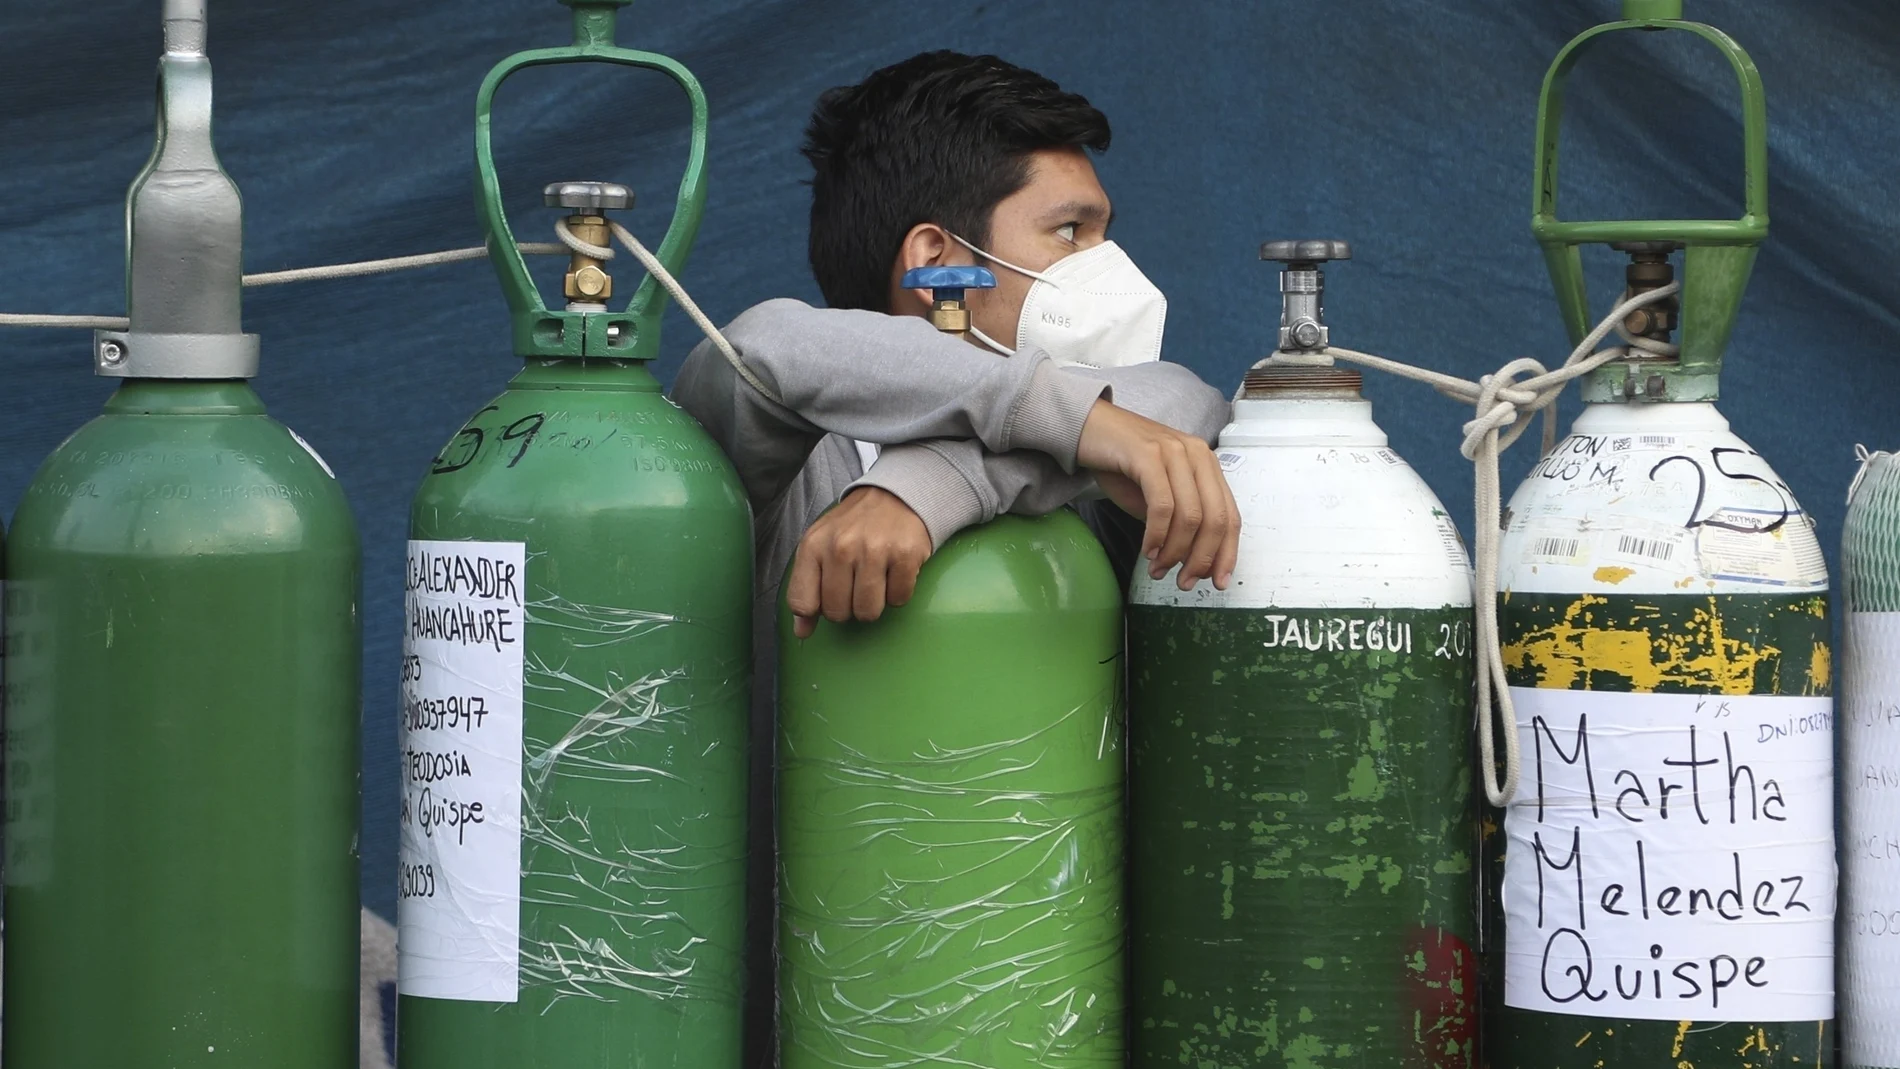 A youth rests on his empty oxygen cylinder waiting for a refill shop to open in the San Juan de Lurigancho neighborhood of Lima, Peru, Monday, Feb. 22, 2021. A crisis over the supply of medical oxygen for coronavirus patients has struck in Africa and Latin America, where warnings went unheeded at the start of the pandemic and doctors say the shortage has led to unnecessary deaths. (AP Photo/Martin Mejia)